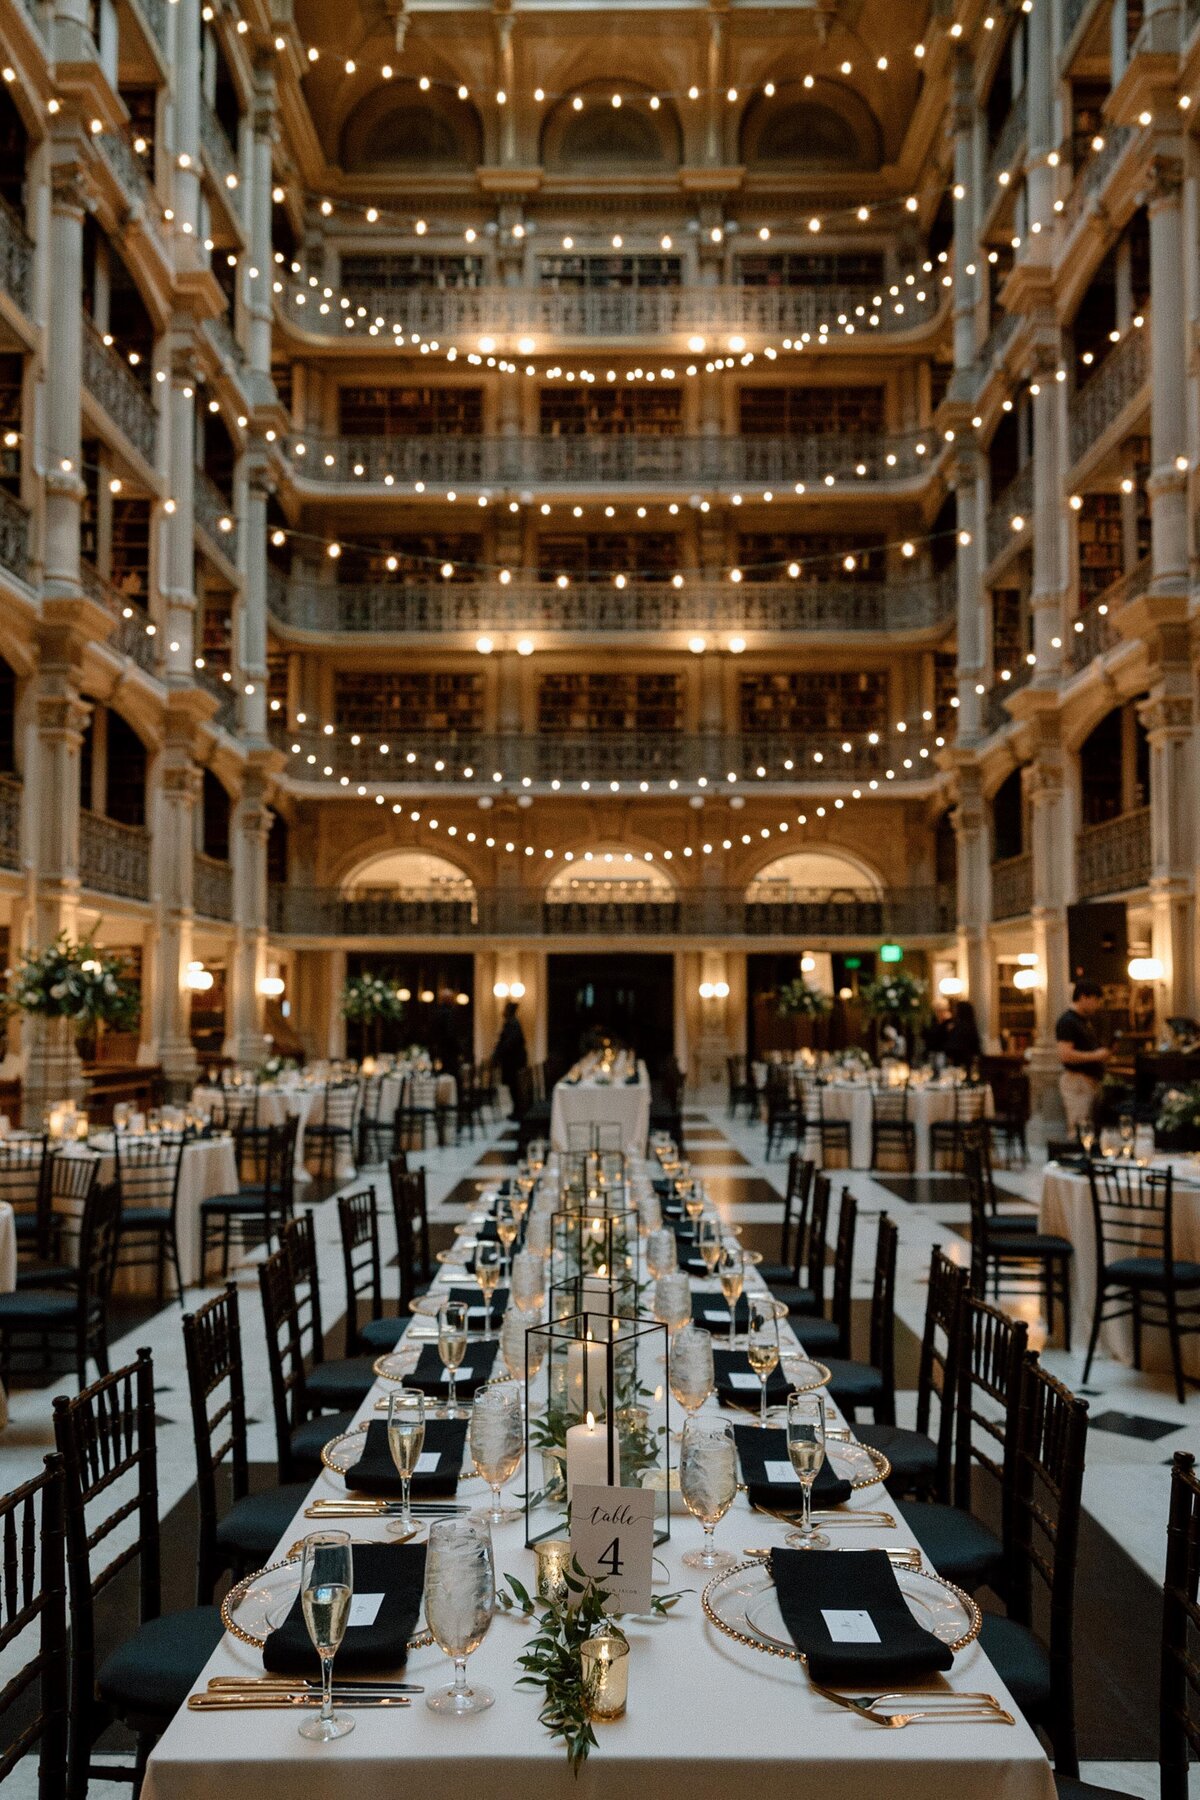 Event-Planning-DC-Wedding-George-Peabody-Library-Venue-Baltimore-Tablescape-Black-Gold-White-Anna-Lowe-Photography-